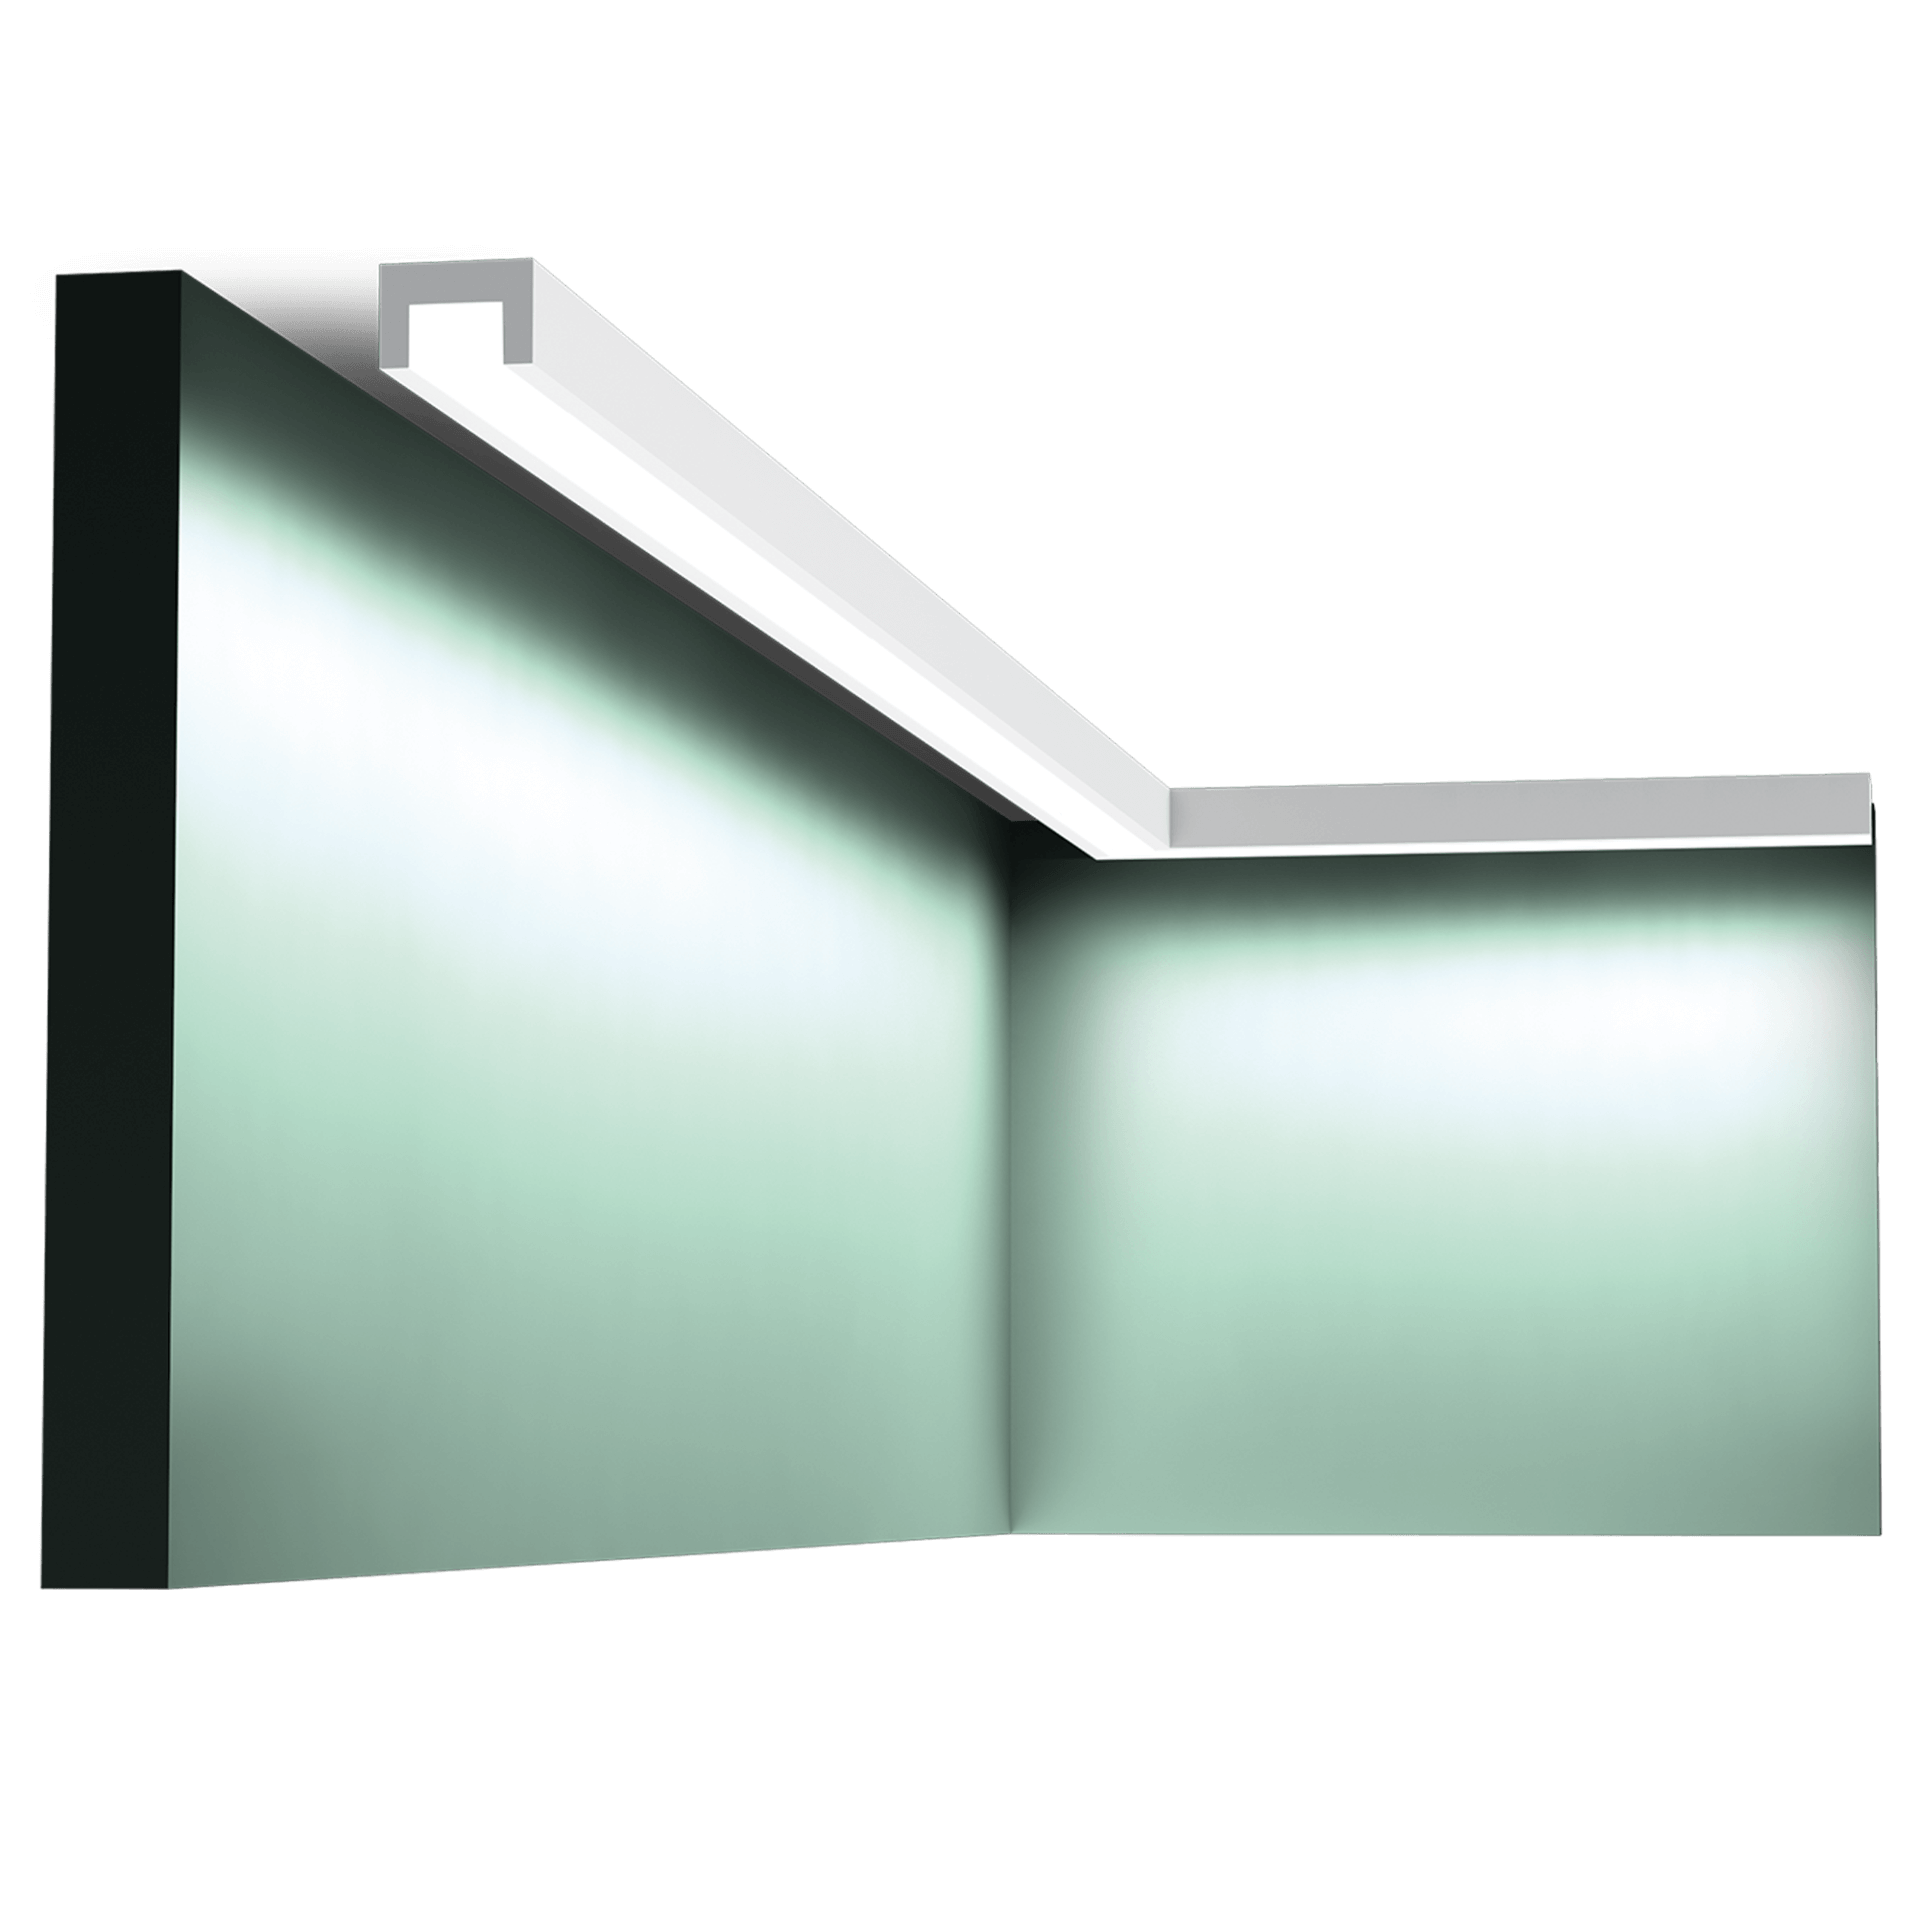 Subtle, impact-resistant U-shaped profile. Add ambience to your interior with indirect LED lighting. Designed by Orio Tonini. Installation remark: use an aluminum tape on the inside of the profile, or an aluminum LED support to avoid the light showing through the moulding.